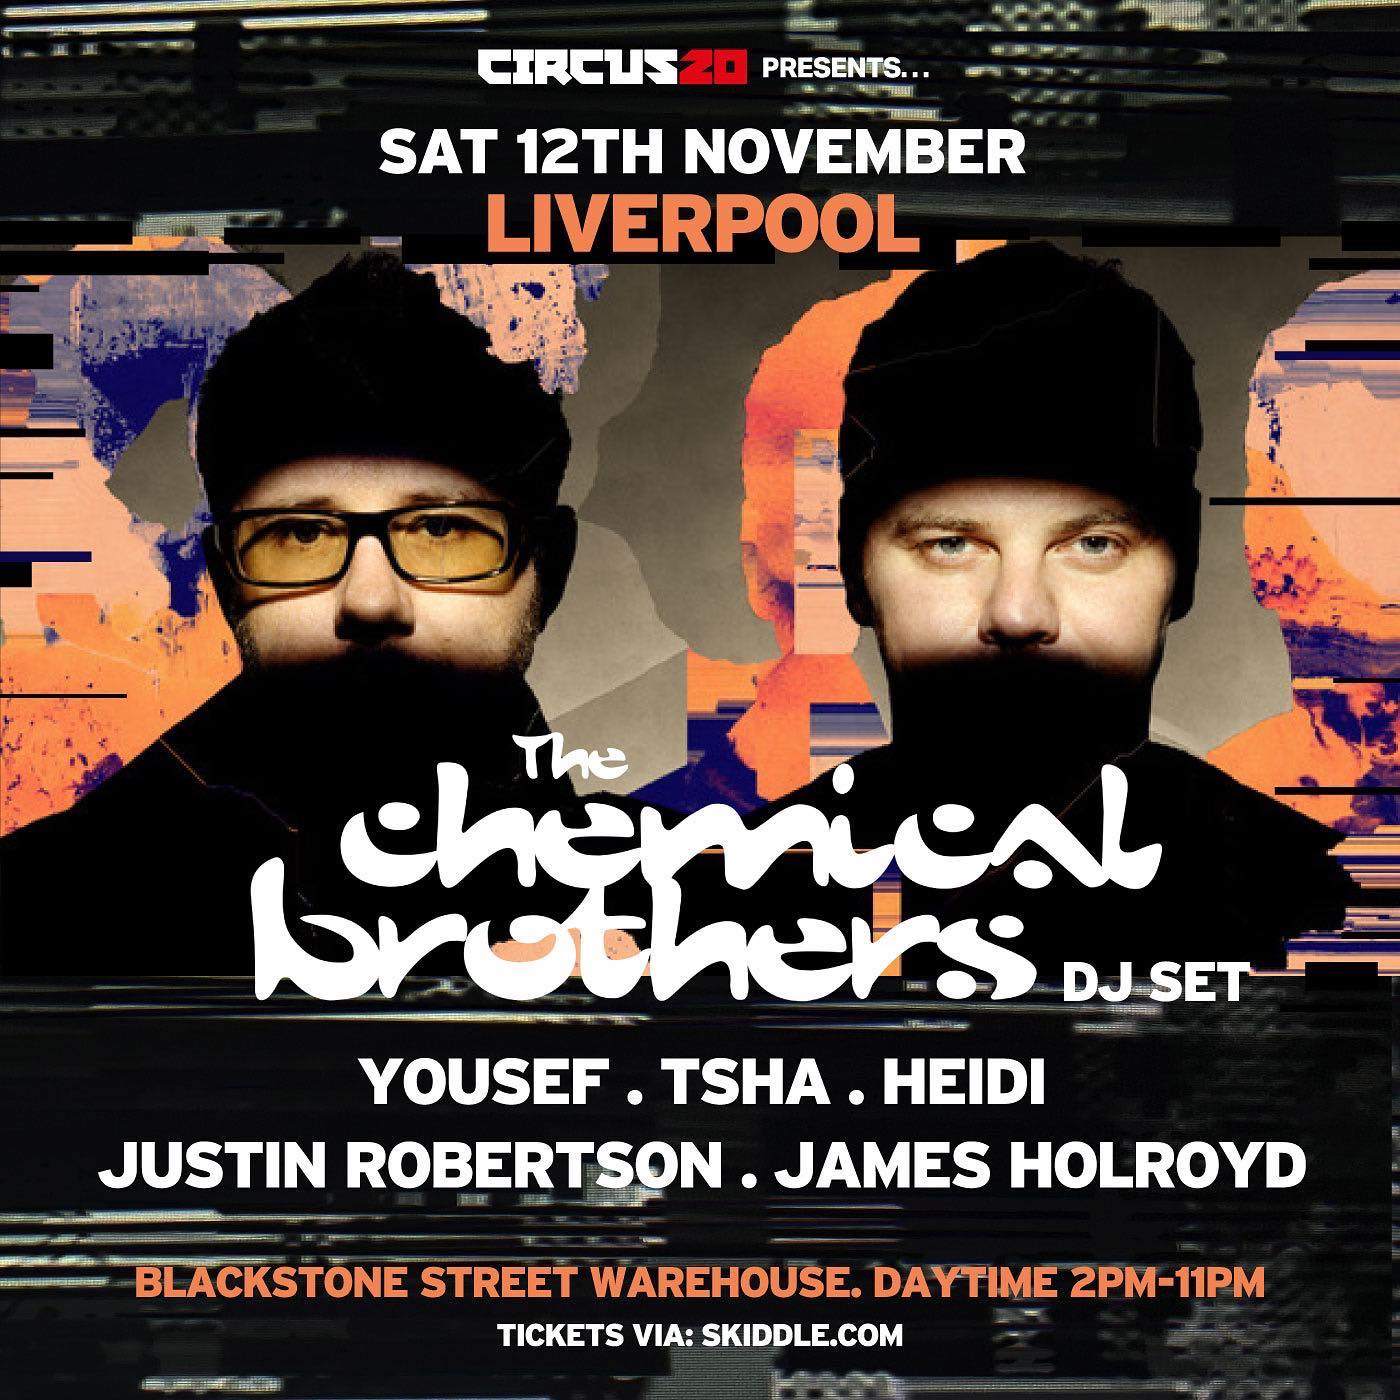 The Chemical Brothers (dj) Sat 12th Nov Liverpool - フライヤー表